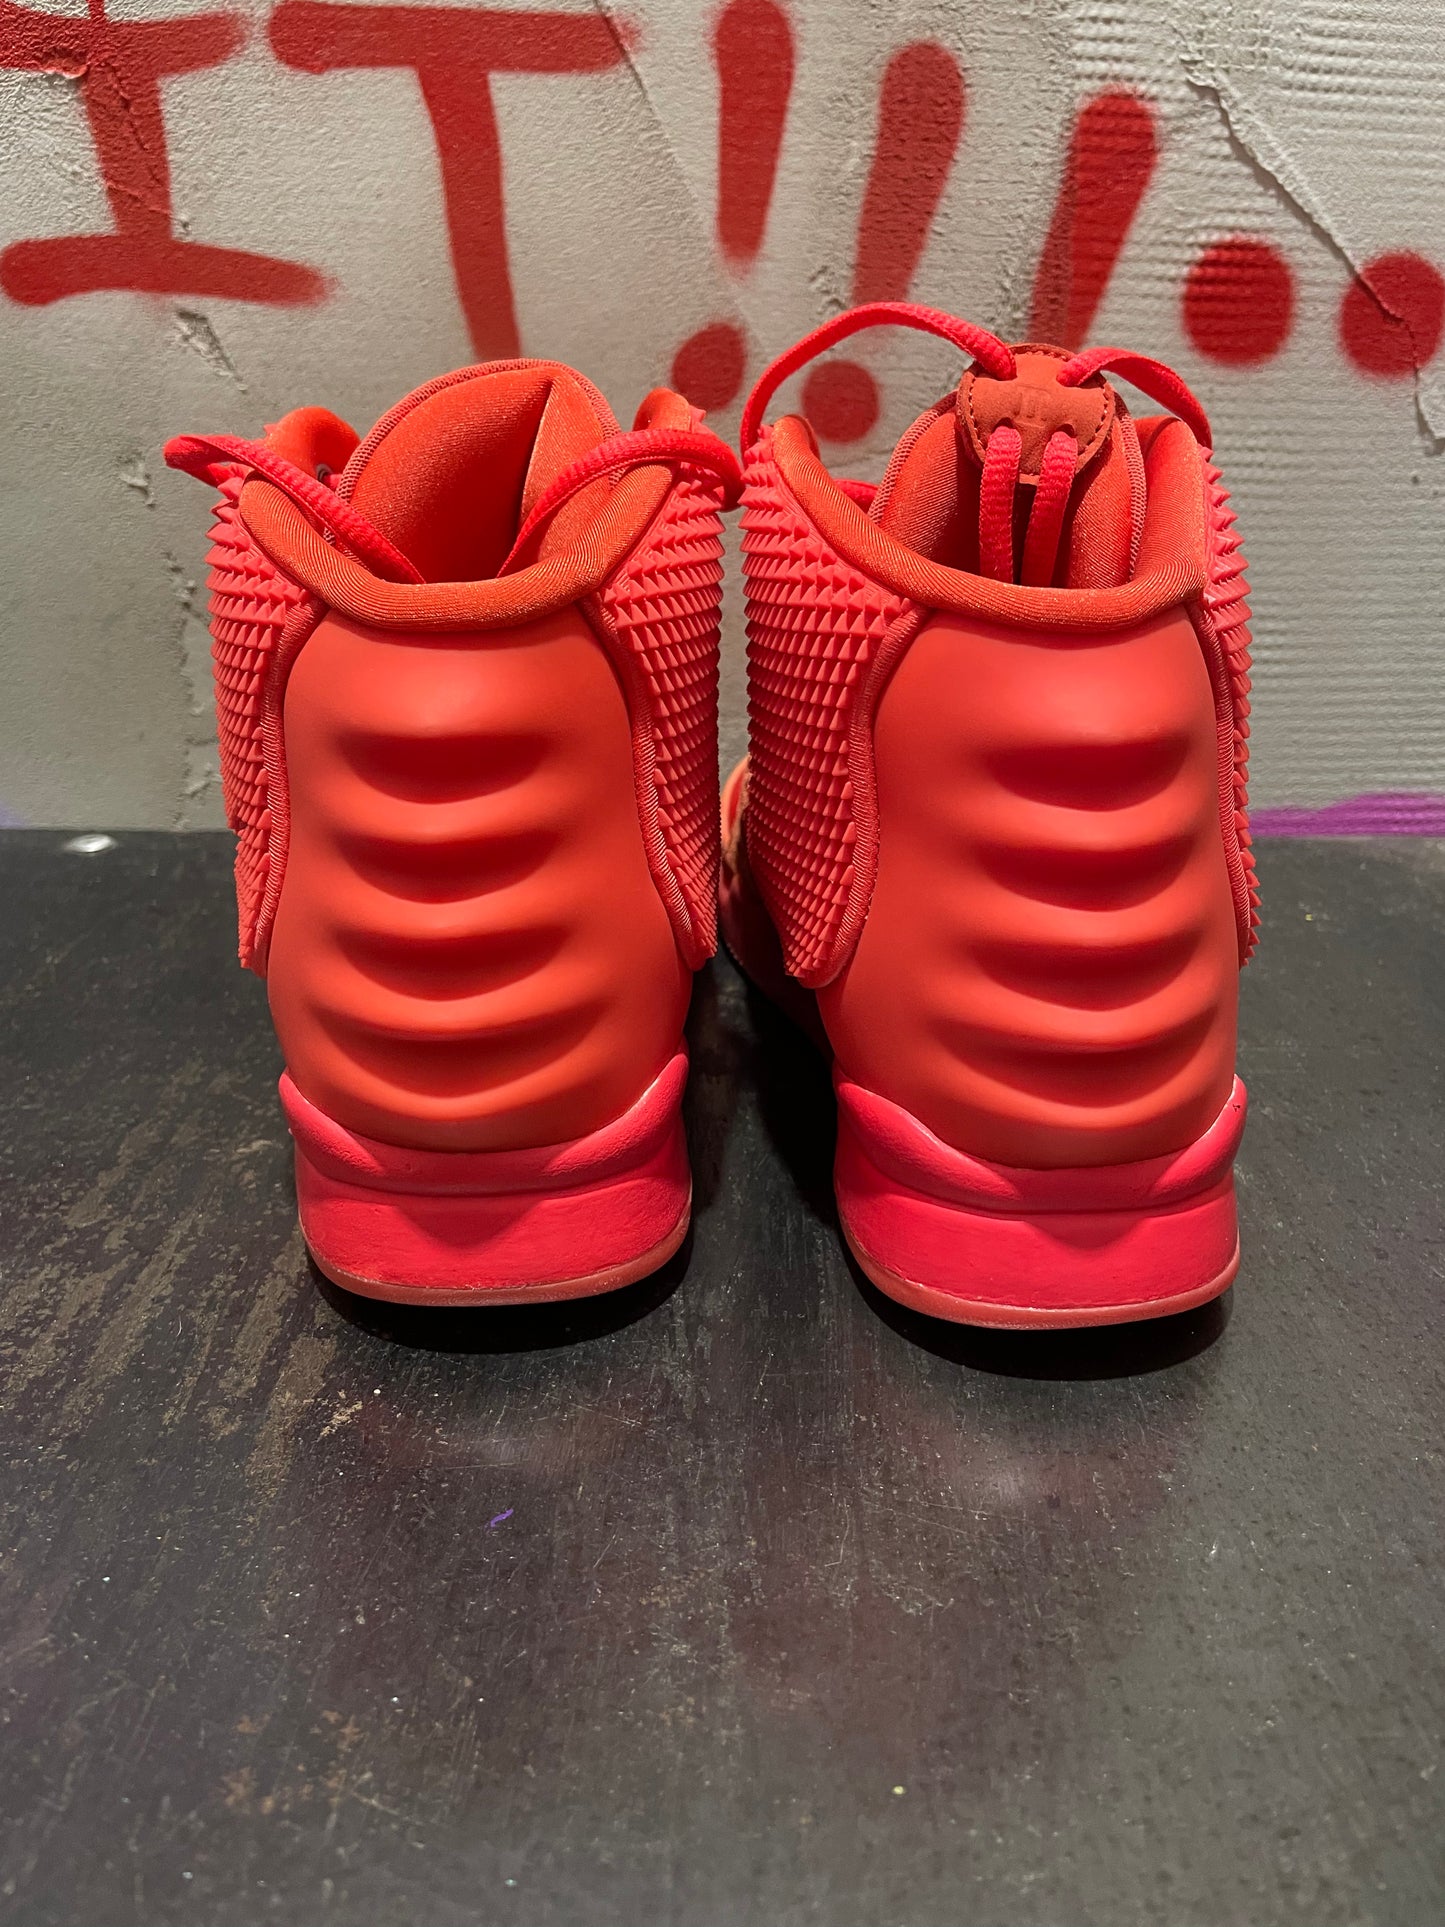 YEEZY X NIKE 'RED OCTOBER' (NO BOX)